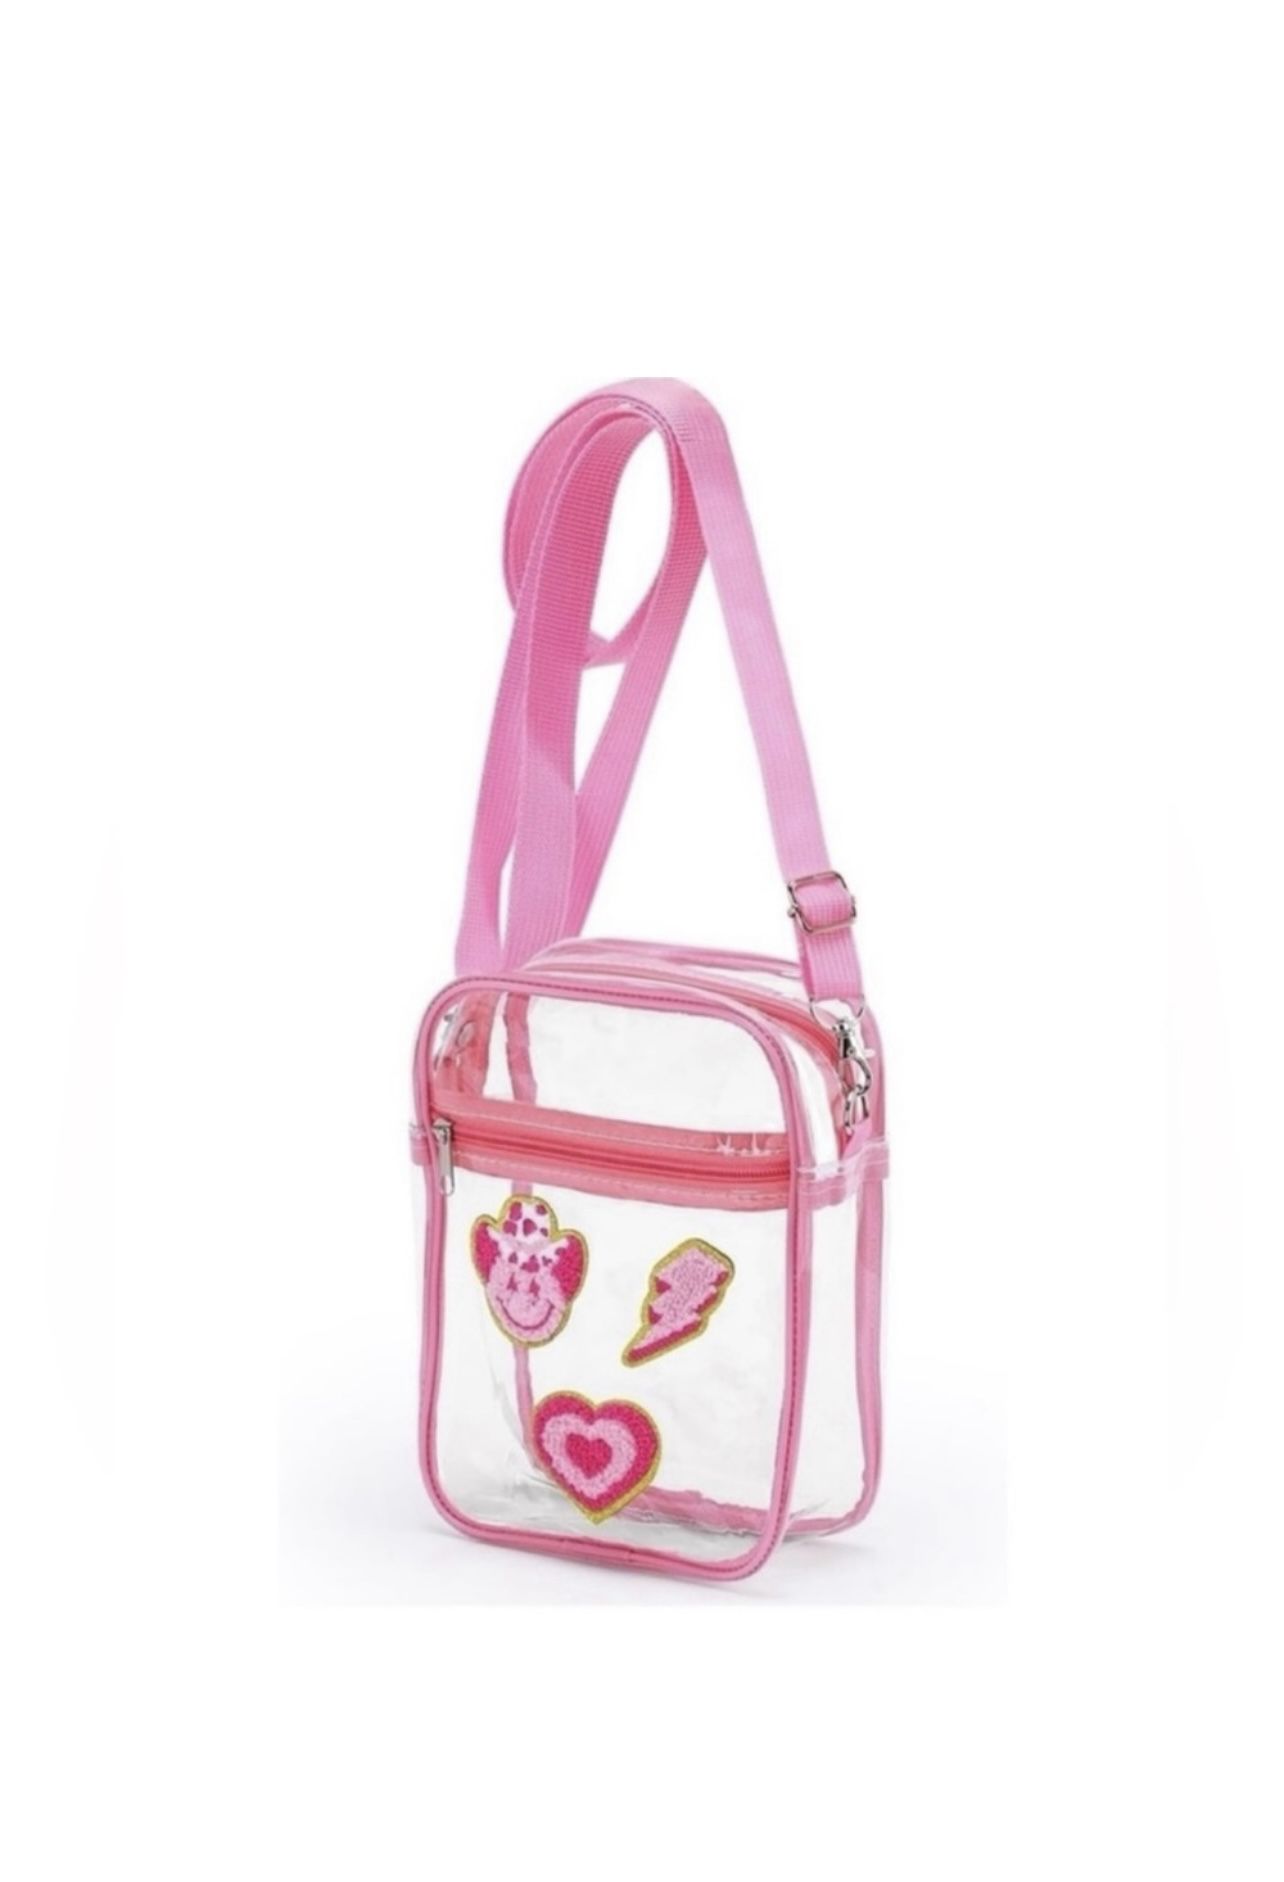 Pink Western Clear Stadium Crossbody Bag Embroidered Patches